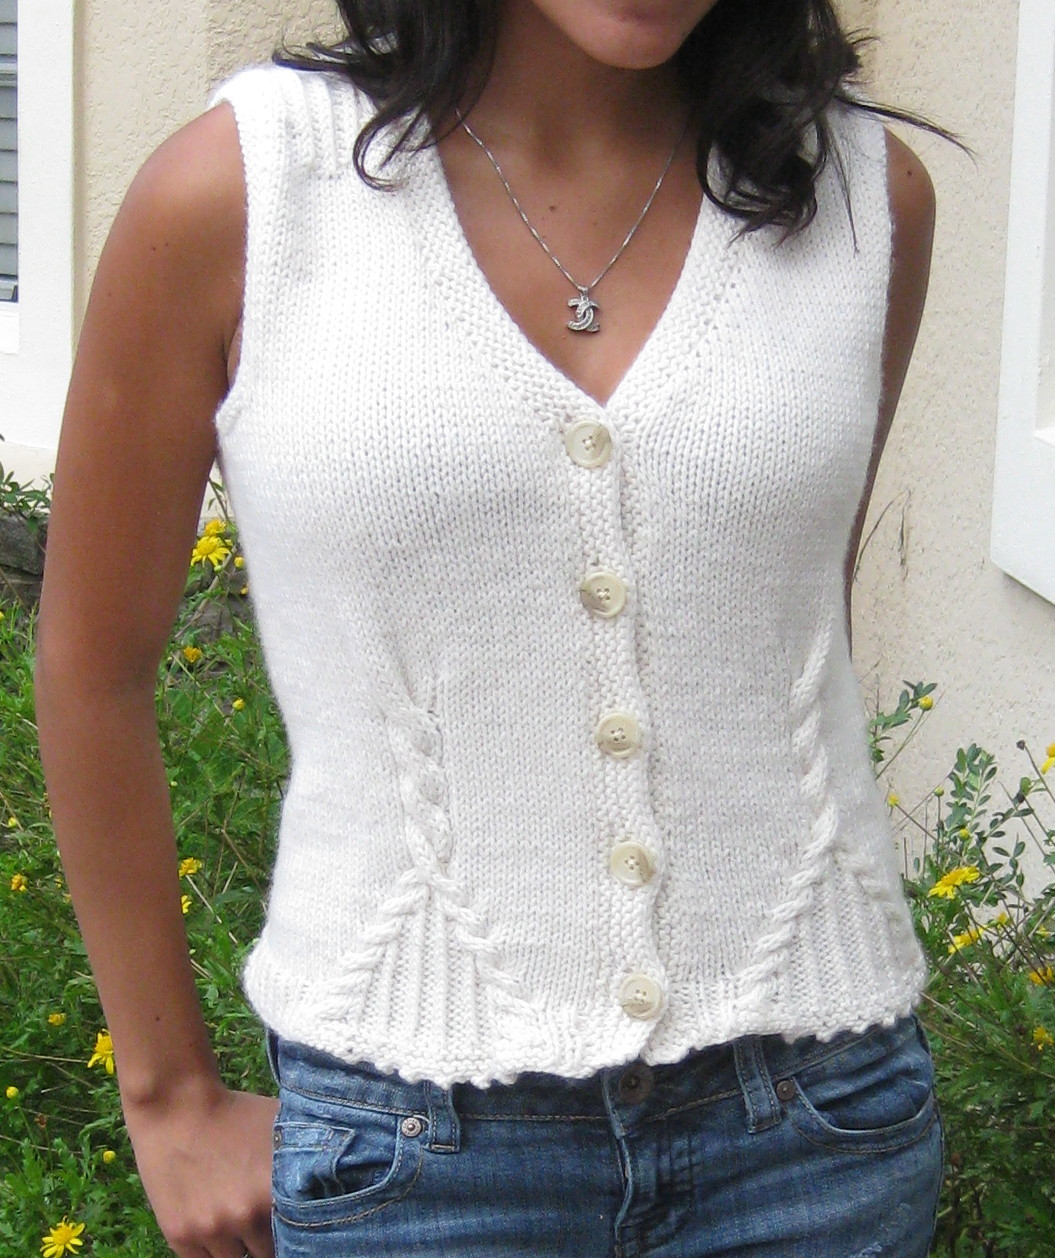 Make a Knit Vest: 5 Free Knitted Vest Patterns from Knitting Daily